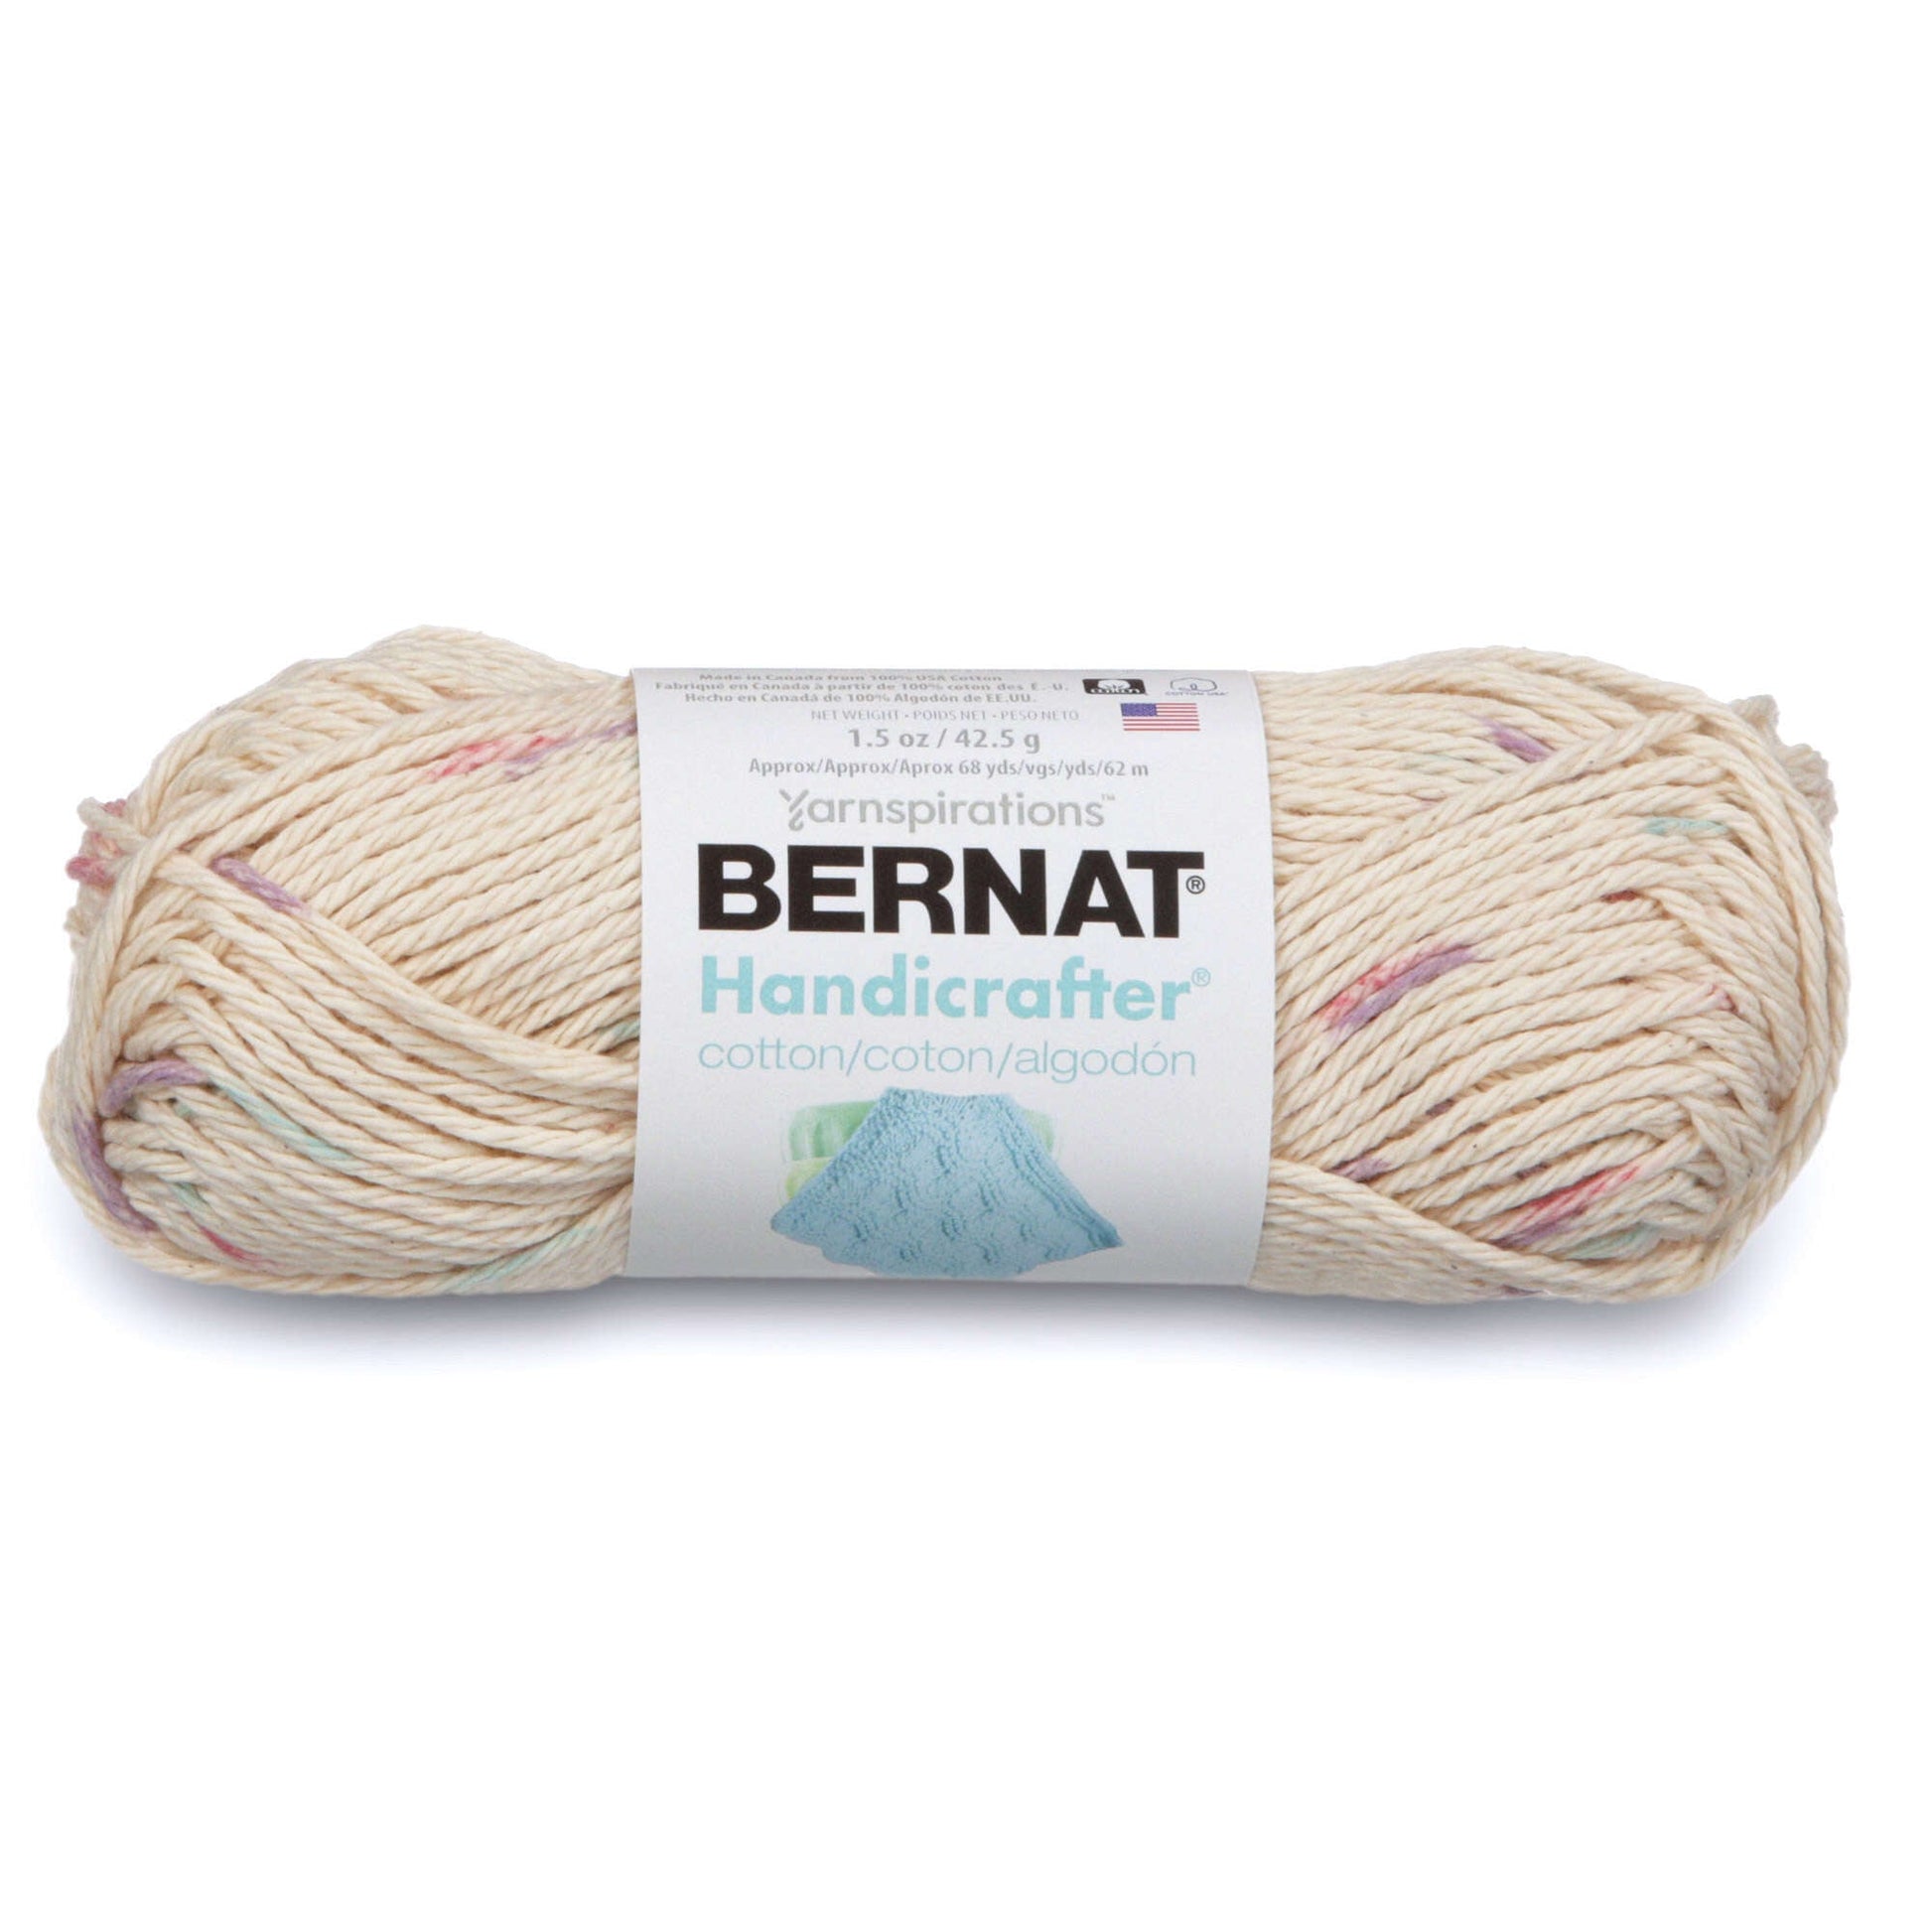 Bernat Handicrafter Cotton Ombres Yarn - Clearance Shades